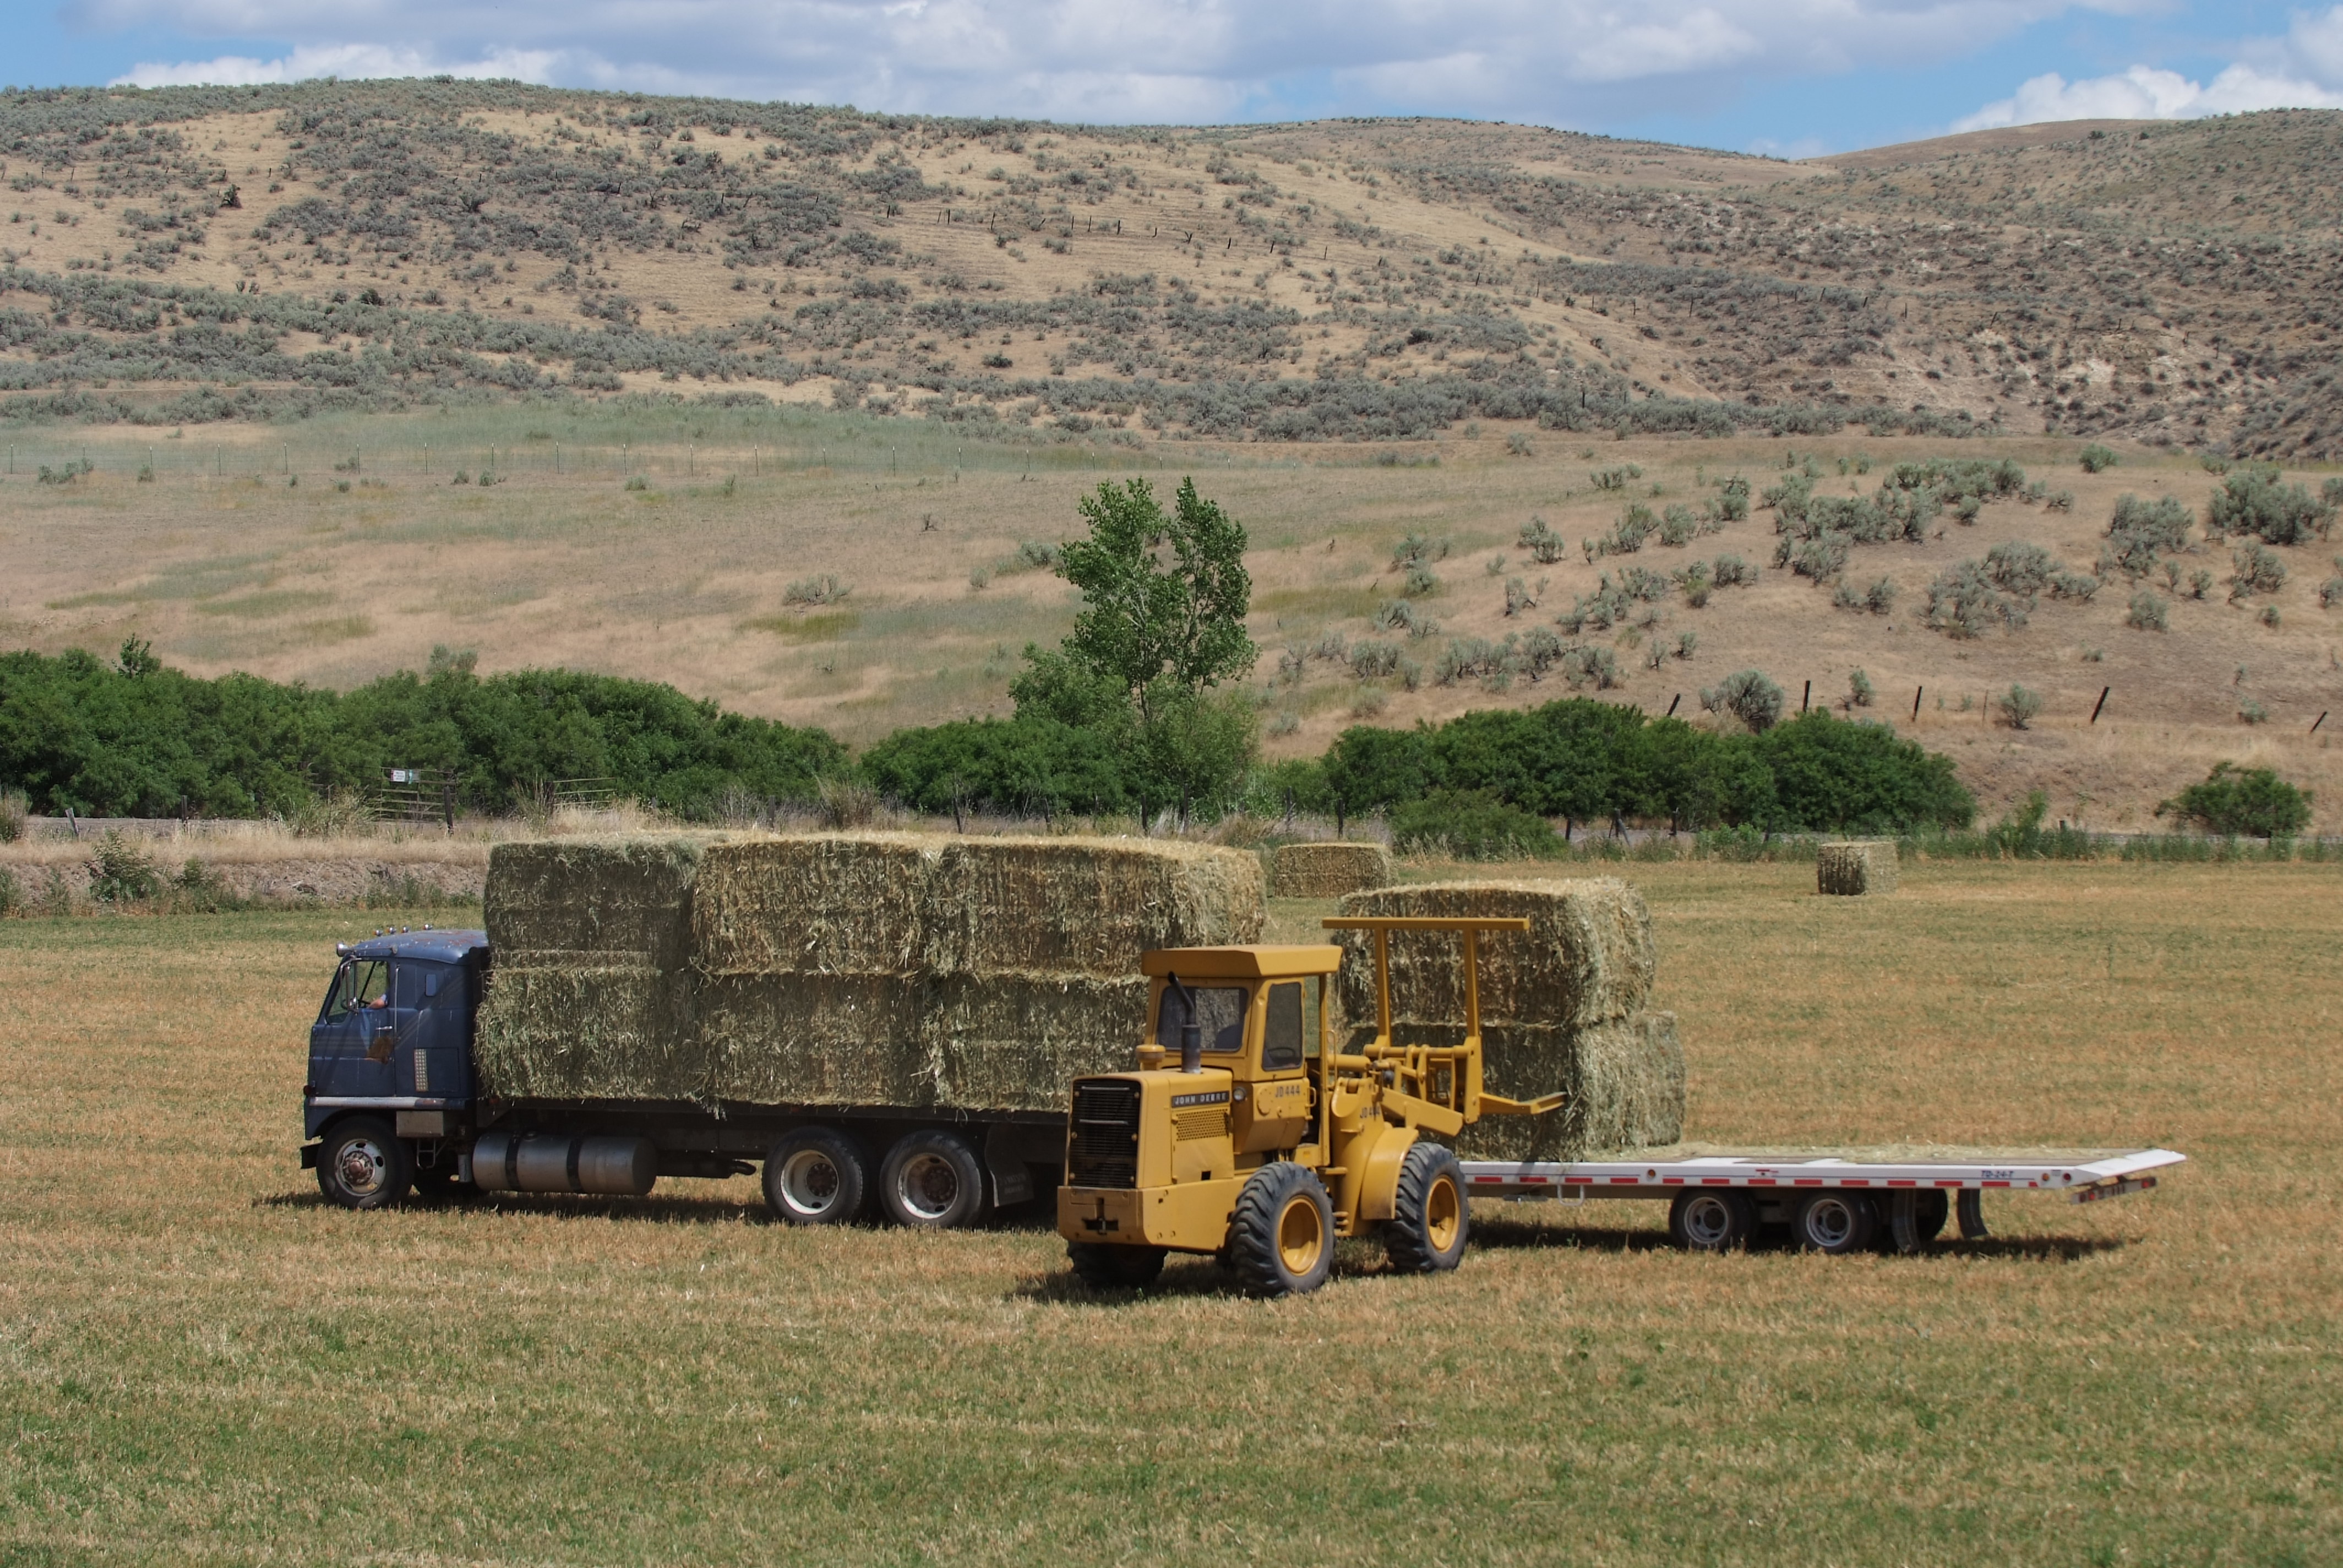 Tractor and truck hauling hay on farm